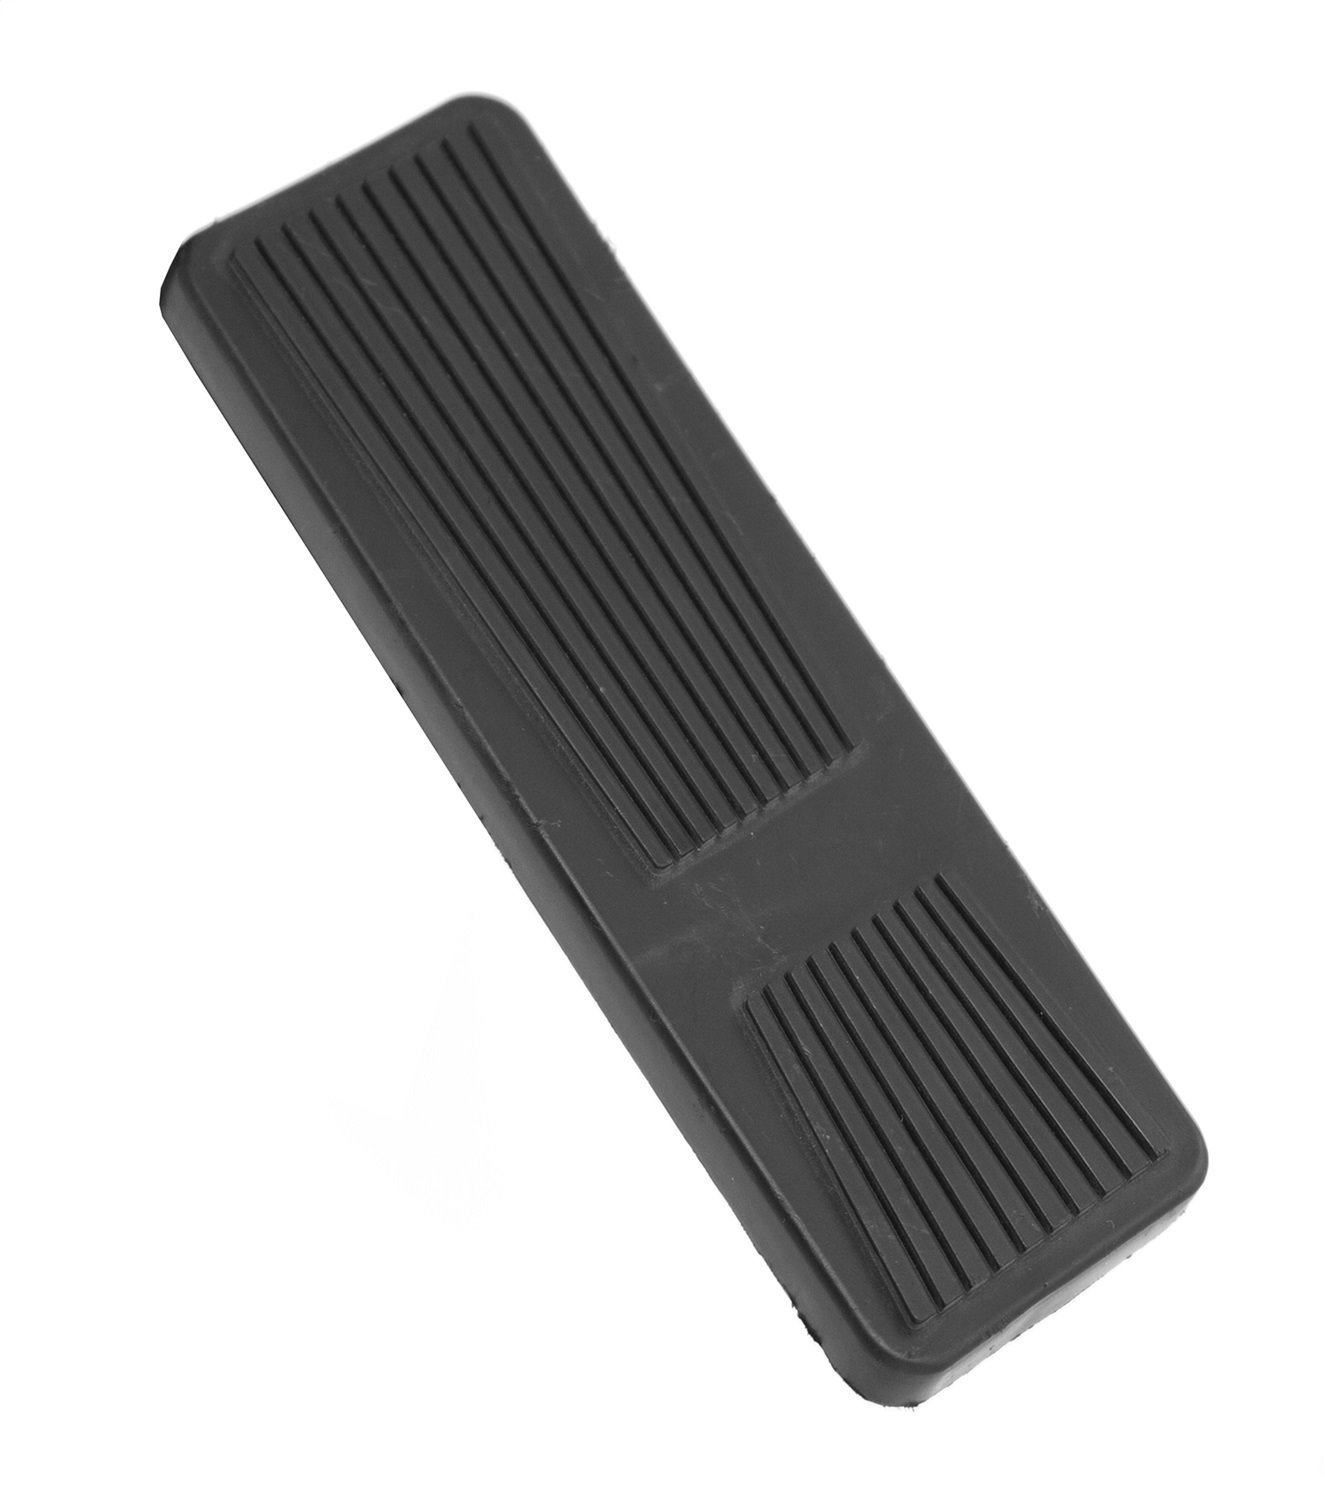 Replacement accelerator pedal pad from Omix-ADA, Fits 76-06 Jeep models Rubber pad only.